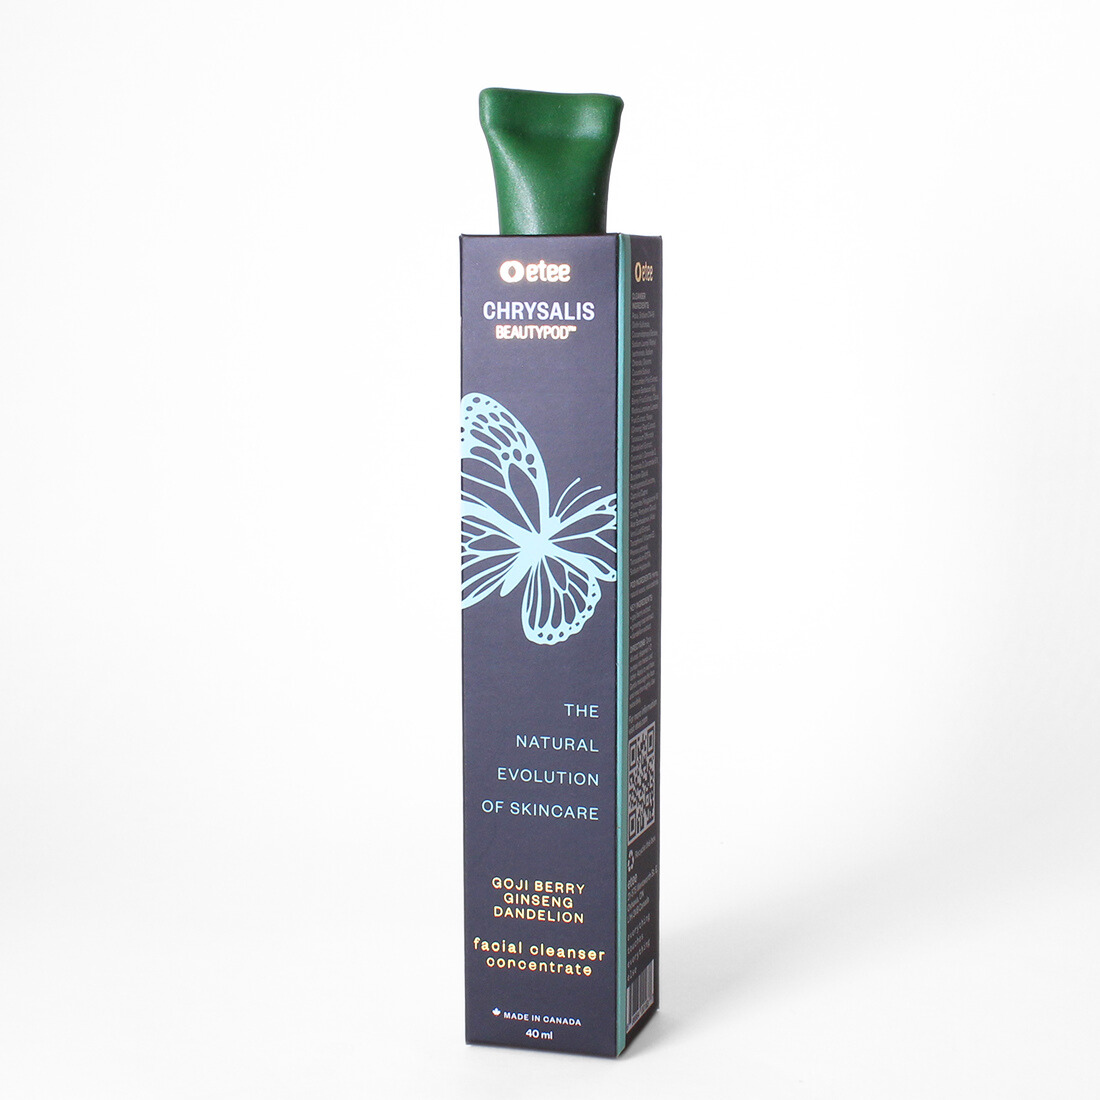 Gentle Facial cleanser with Ceramides, Goji Berry and Ginseng - Super concentrated, low emissions, 0 plastic